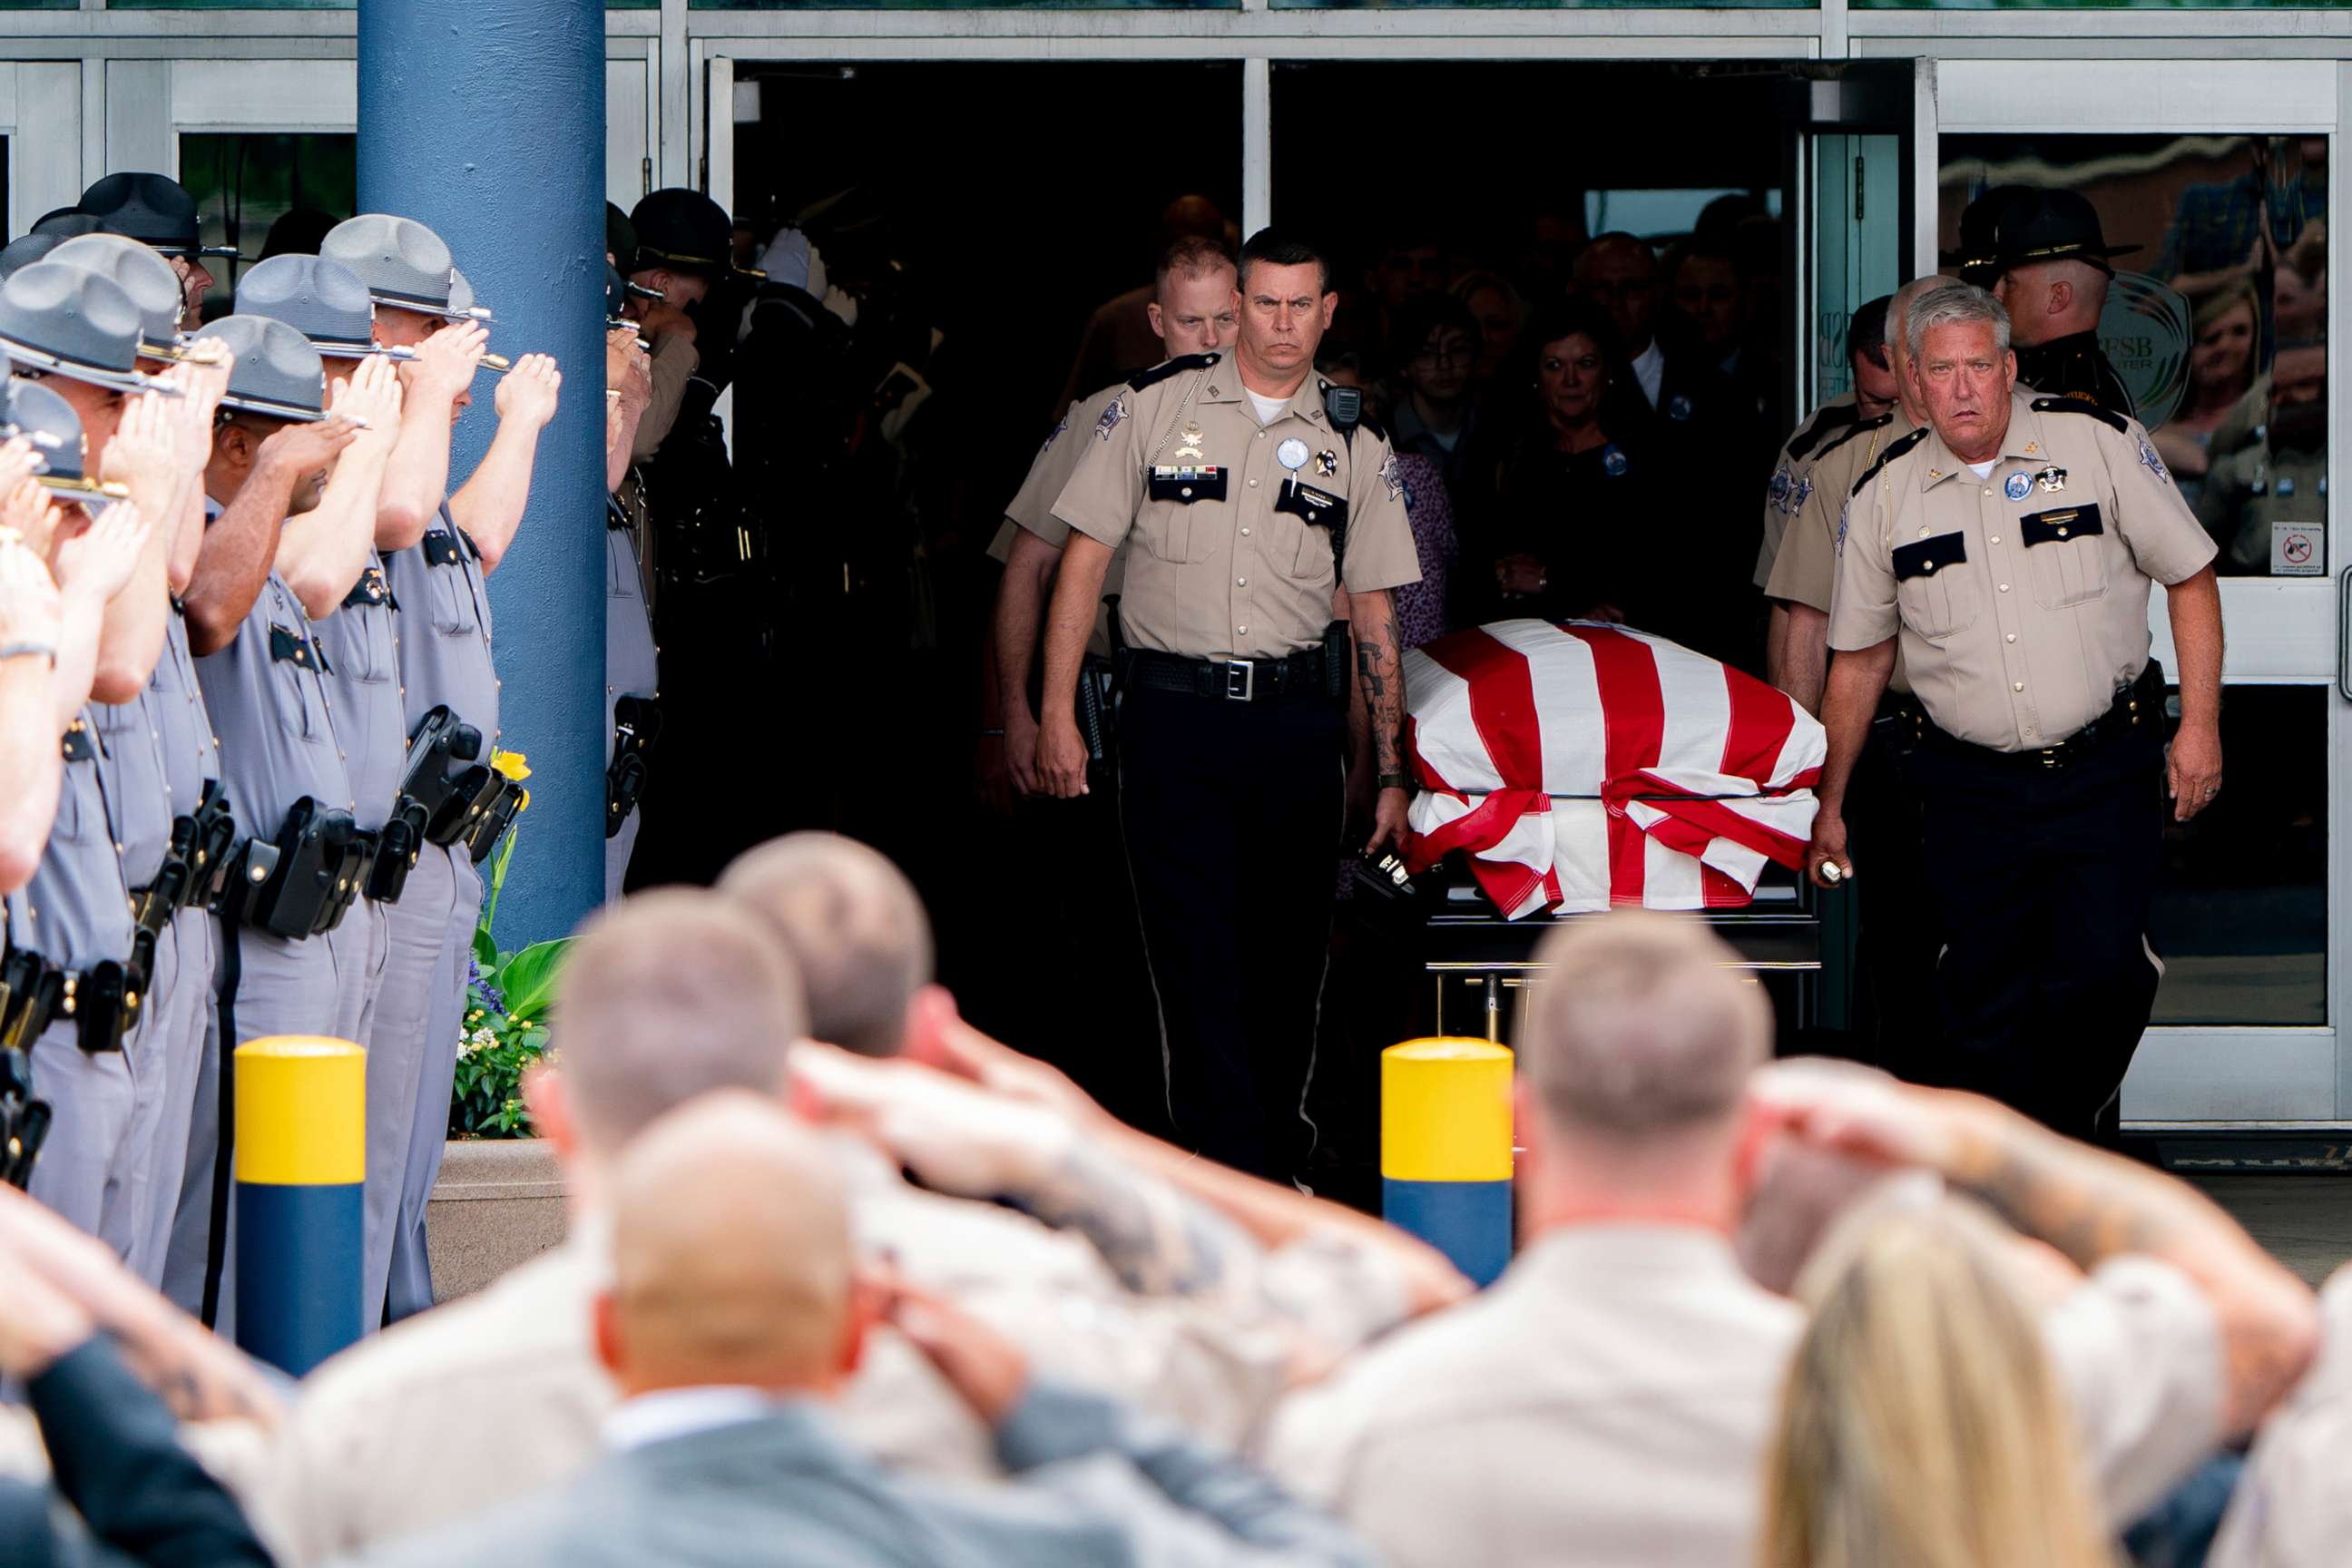 PHOTO: Law enforcement officers salute as Calloway County officers carry the casket of fallen Calloway County Deputy Jody Cash following Cash's memorial service in Murray, Ky., May 21, 2022.